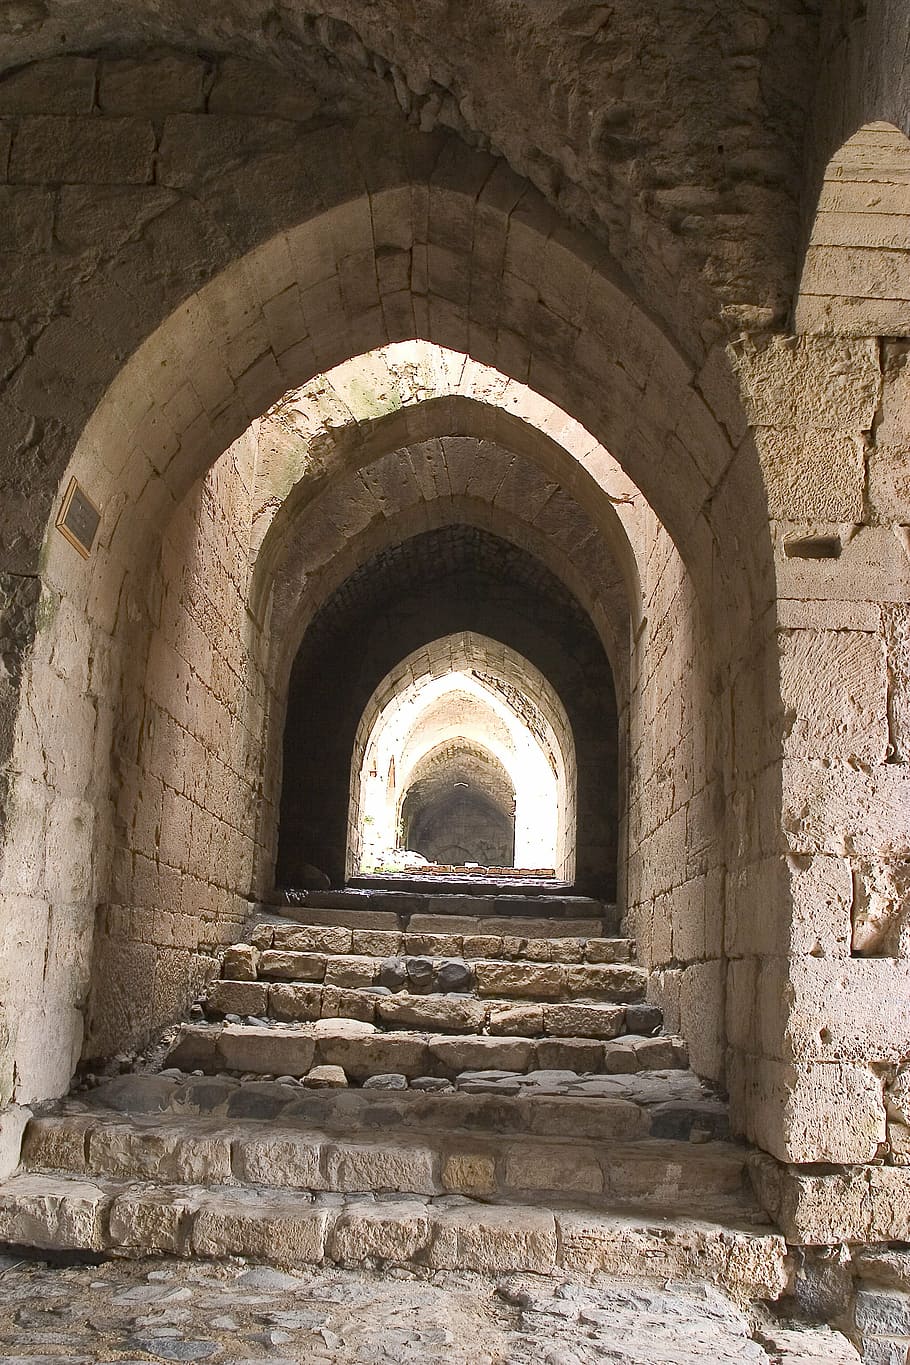 krak of chevaliers, crusader, syria, ancient cities, architecture, built structure, arch, history, staircase, the past